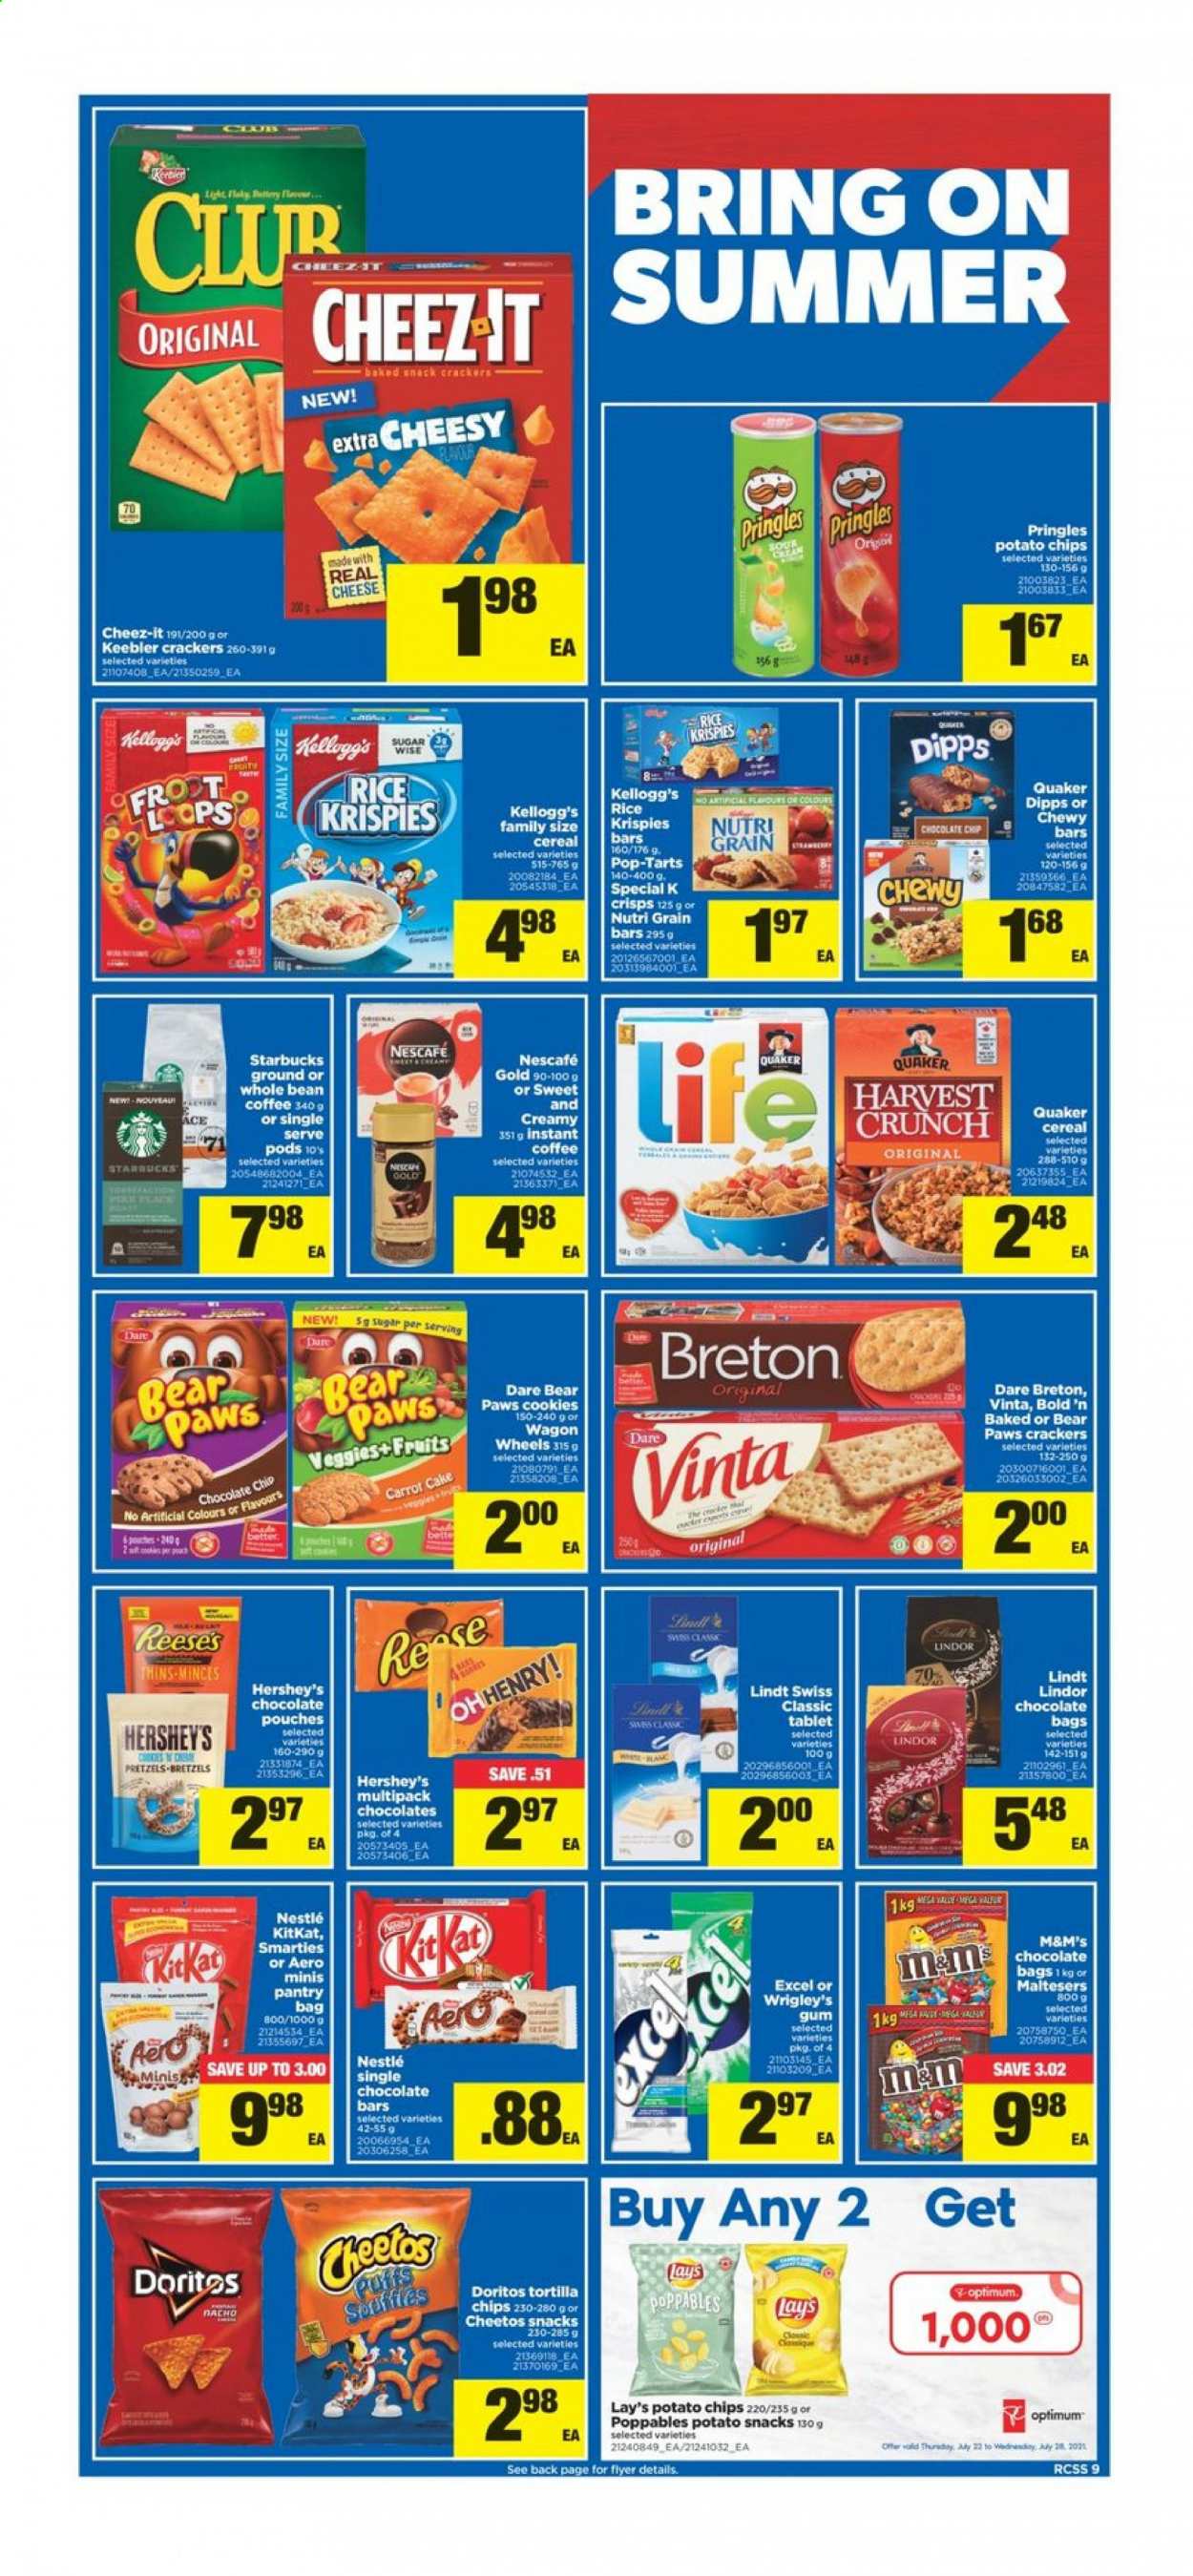 thumbnail - Real Canadian Superstore Flyer - July 22, 2021 - July 28, 2021 - Sales products - tablet, tortillas, pretzels, cake, Quaker, Reese's, Hershey's, cookies, snack, KitKat, crackers, Kellogg's, Maltesers, Pop-Tarts, Keebler, chocolate bar, Doritos, potato chips, Pringles, Cheetos, Lay’s, Thins, Cheez-It, sugar, cereals, Rice Krispies, Nutri-Grain, instant coffee, Starbucks, Paws, Optimum, WD, wagon, Nestlé, chips, Nescafé, M&M's. Page 9.